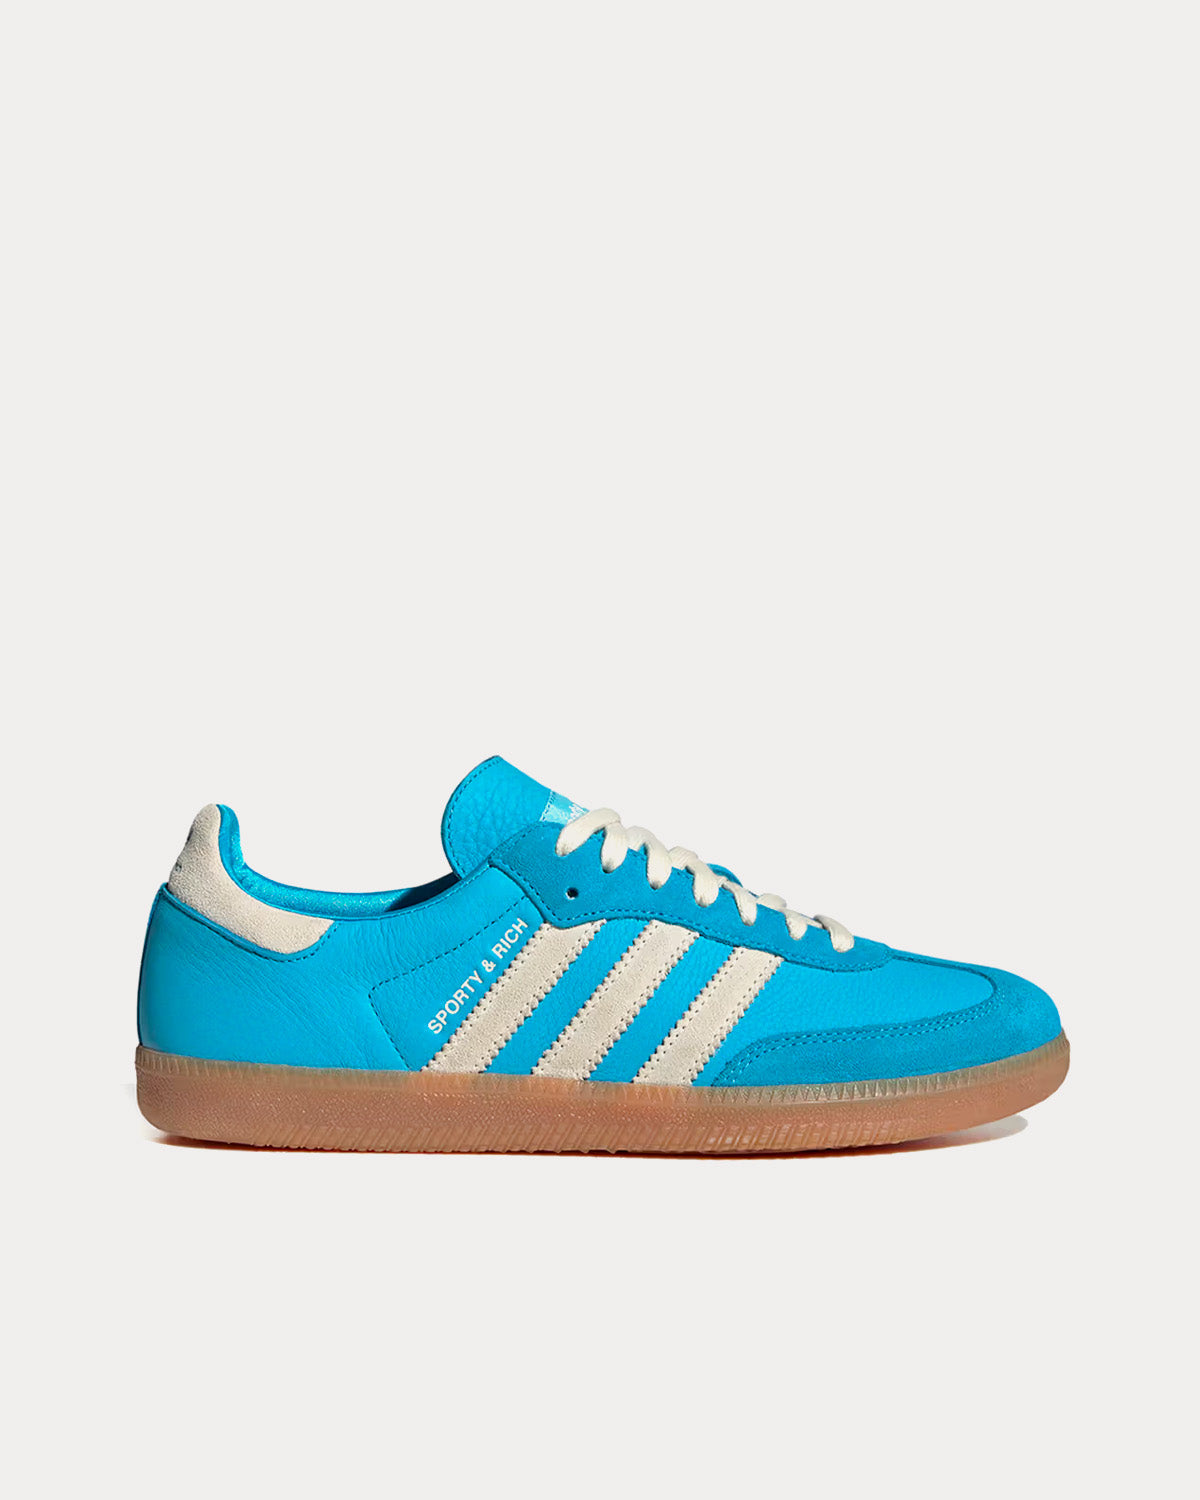 Adidas x Sporty & Rich - Samba Blue / Off-White Low Top Sneakers